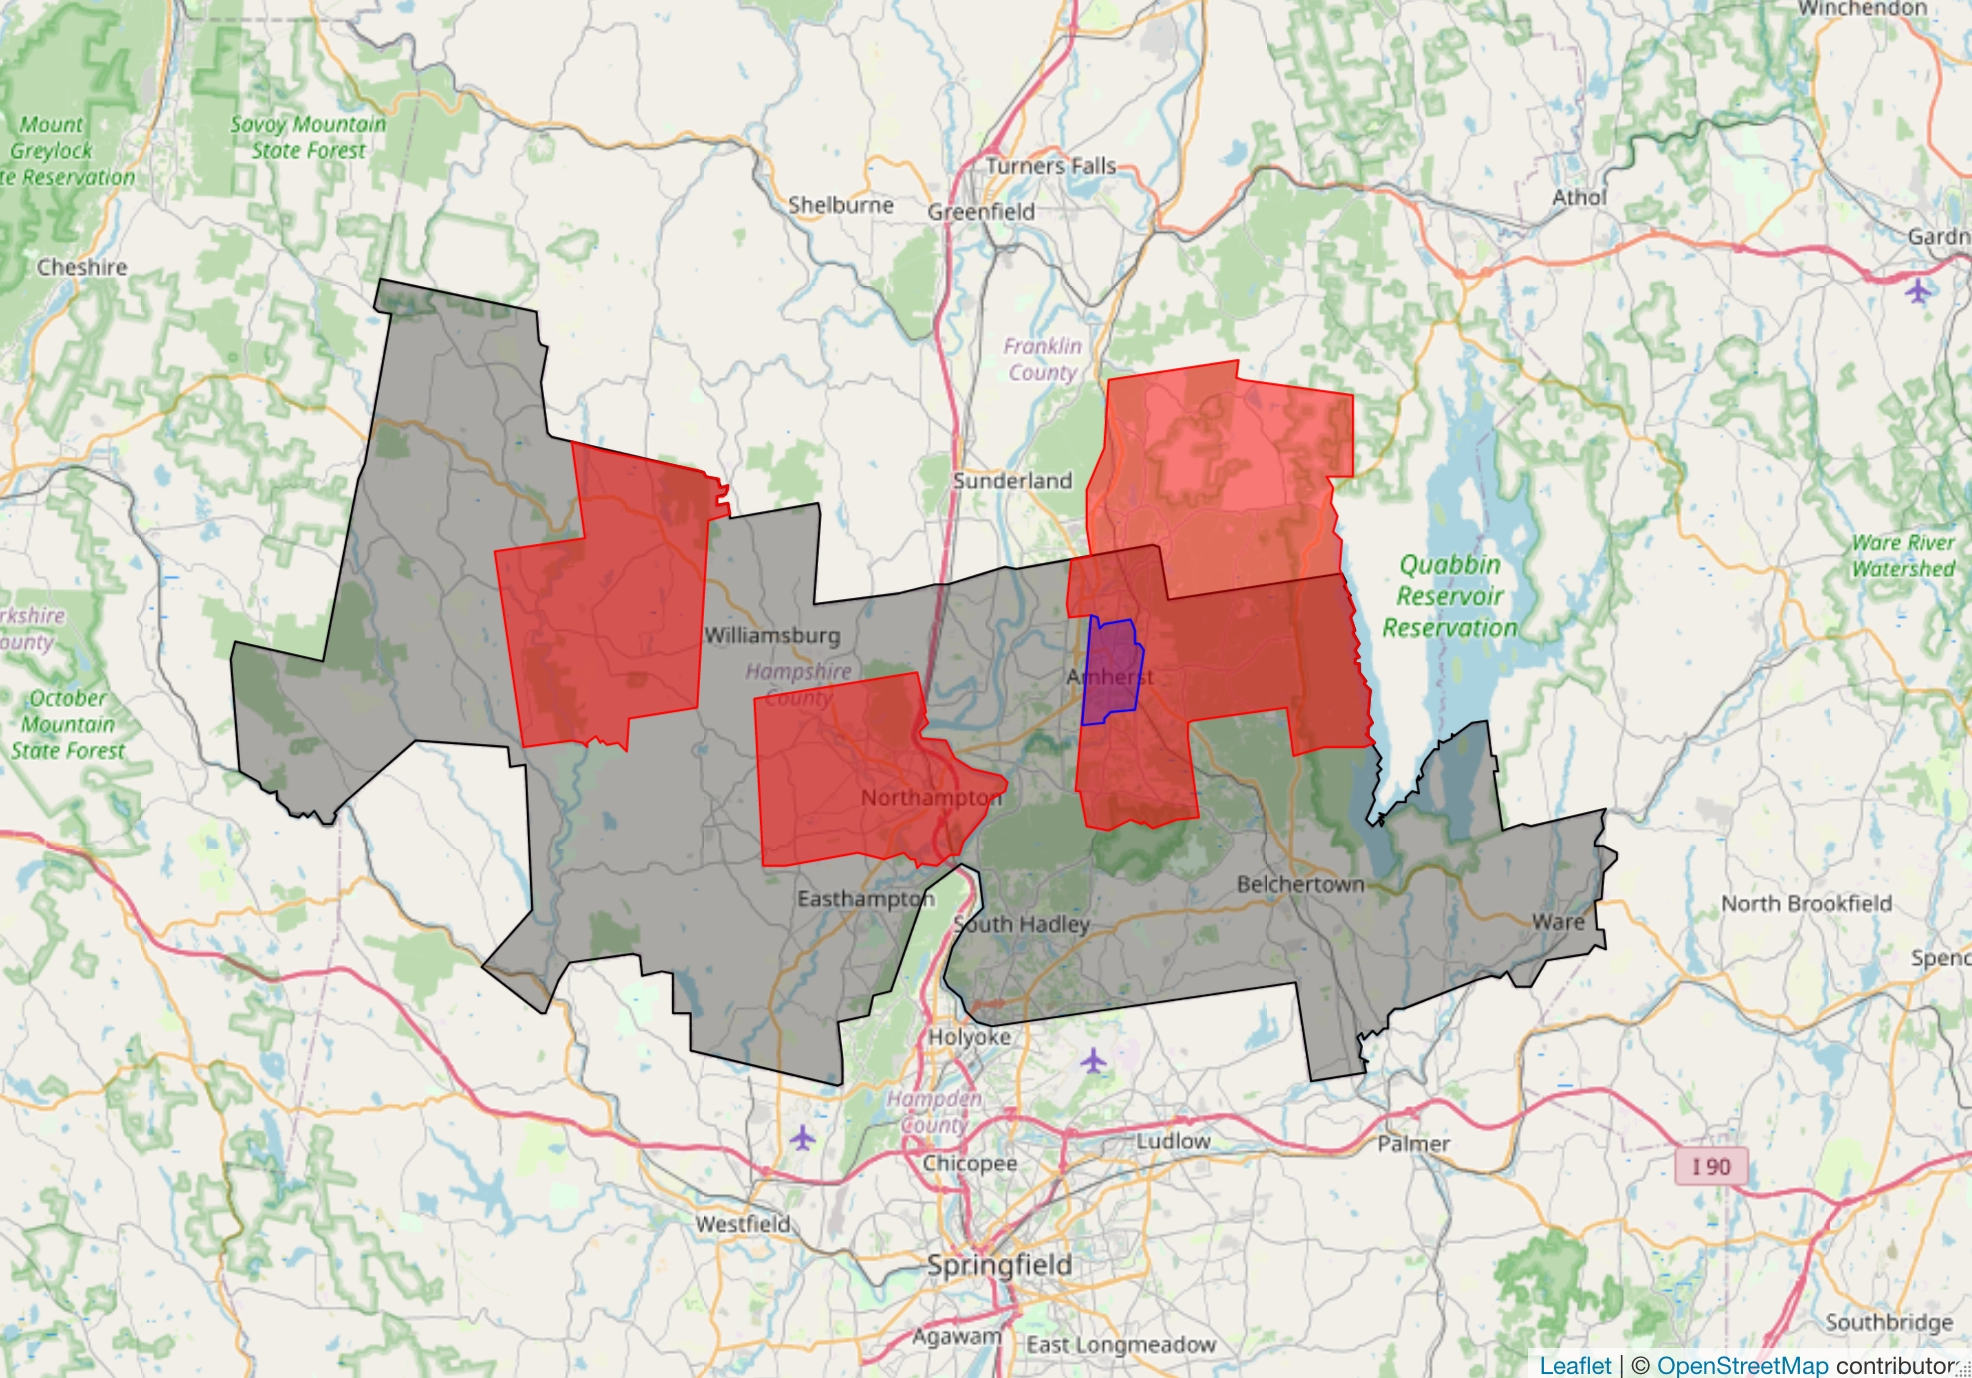 FIGURE 1. An example of overlapping municipal entities that may issue debt. The light grey area shows the boundaries of Hampshire County in Western Massachusetts. The red areas are three school districts that are contained in or overlap with Hampshire County: Chesterfield-Goshen School District on the west side of the County, Northampton in the center, and the Amherst-Pelham Regional School District in the east. The blue area is the Amherst Community Development District, a smaller municipal boundary that is wholly contained within both the Amherst-Pelham Regional School District and Hampshire County. Note that, to add an additional layer of complexity, the Amherst-Pelham Regional School District includes a substantial area of land that is not located in Hampshire County. Source: ICE Sustainable Finance as of 3/15/2024.